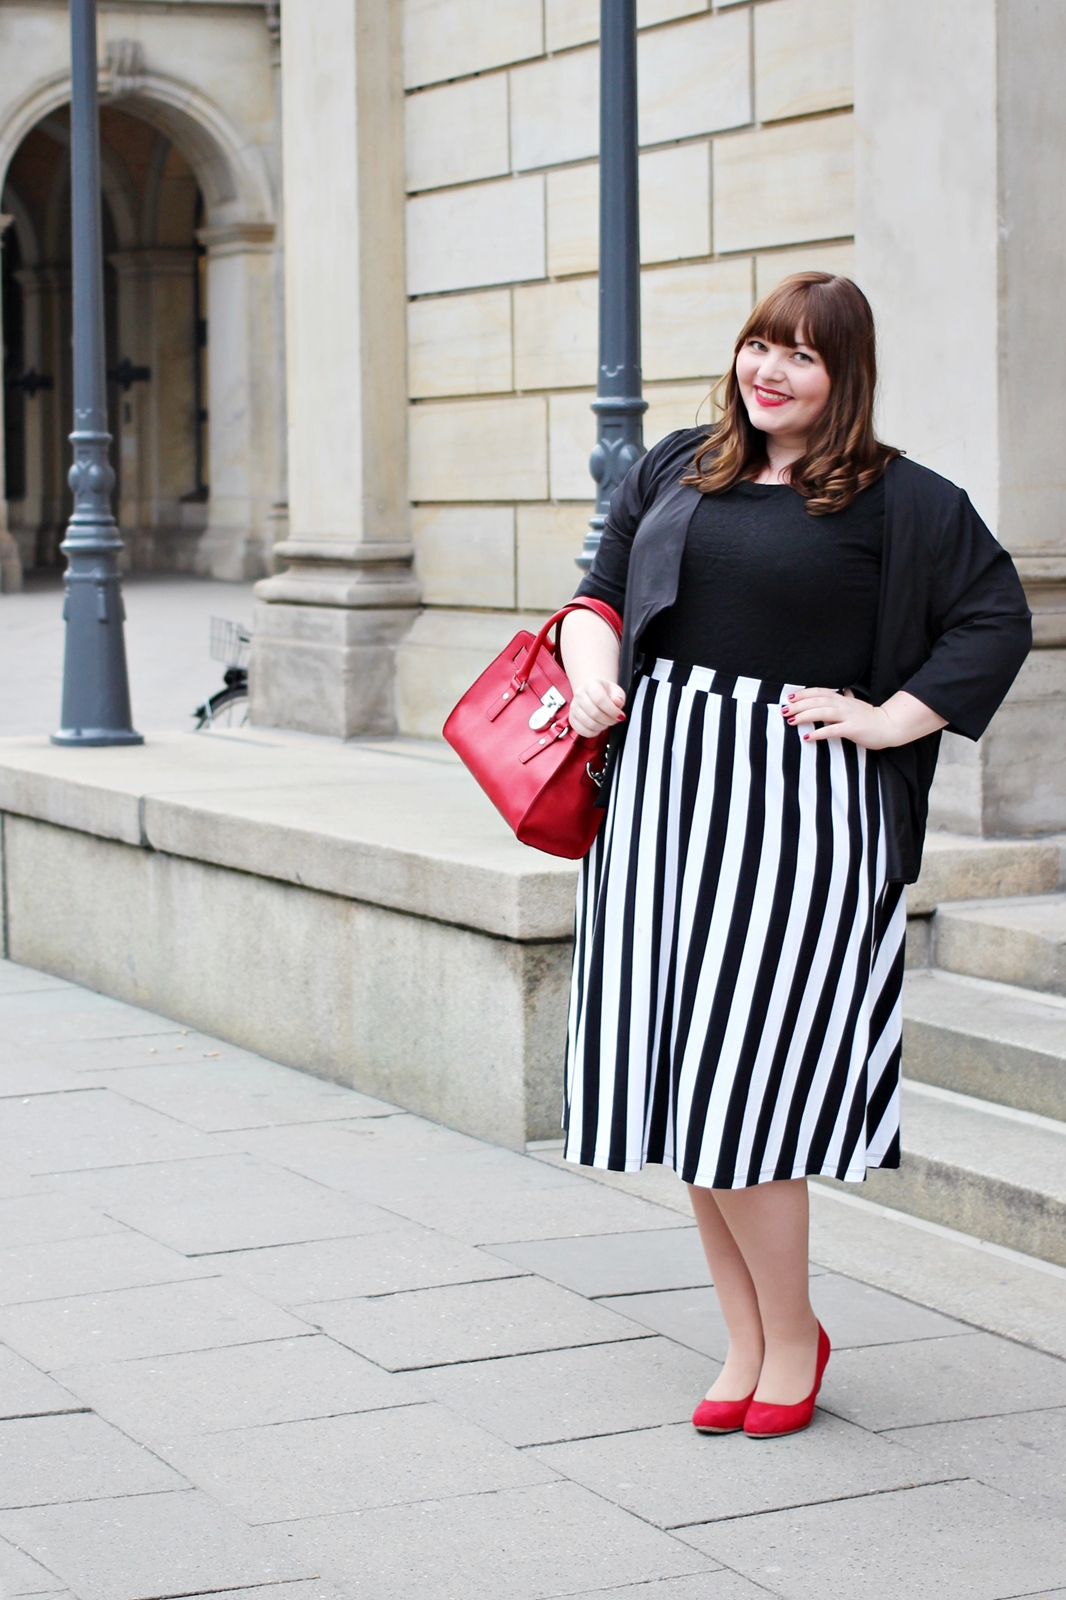 What I Wore to the Fashion Show | Plus Size Outfit with an Asos Curve striped skirt and red accessories